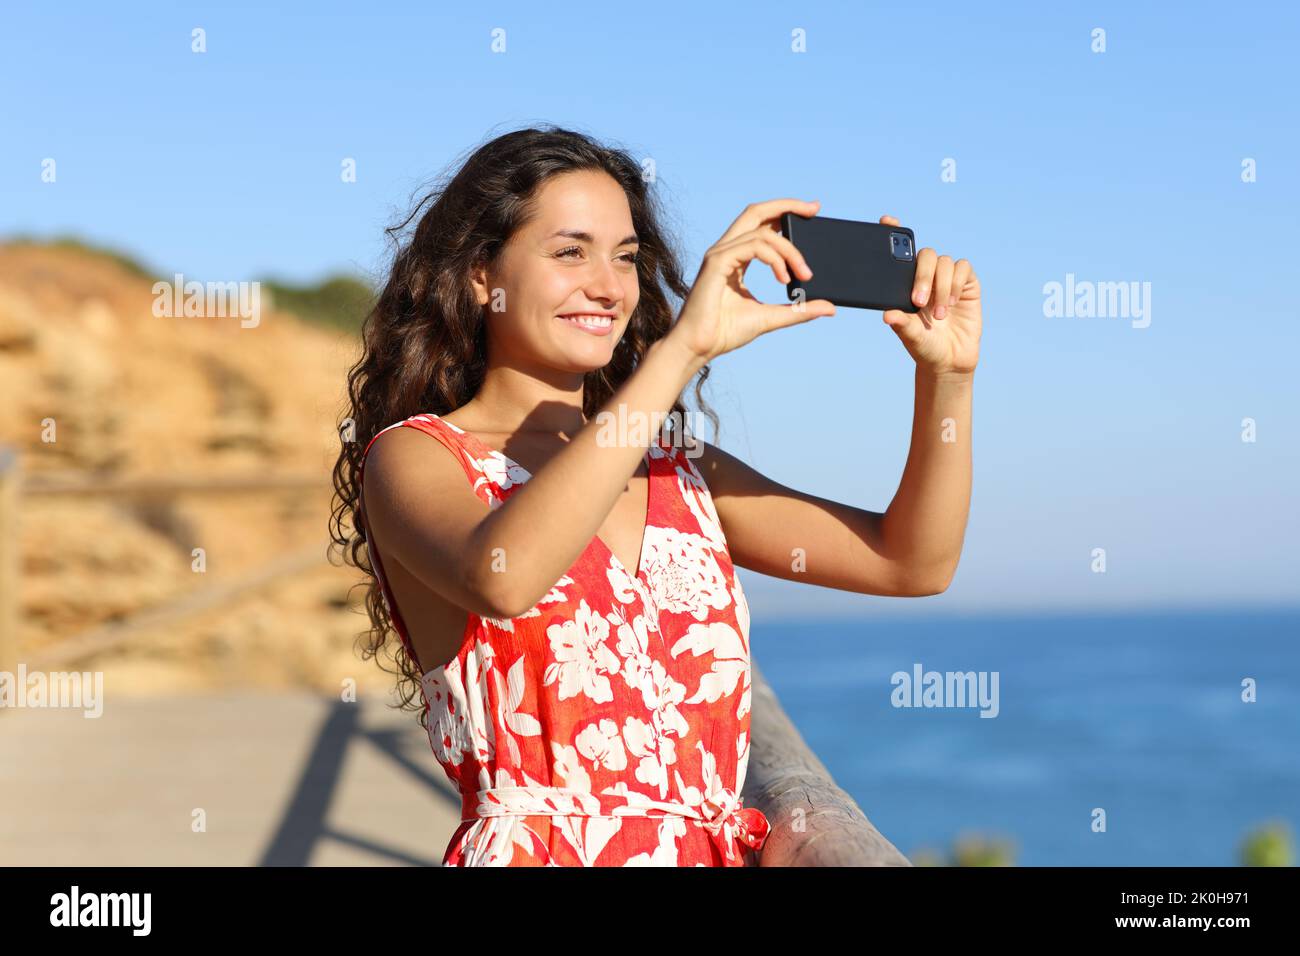 Tourist on the beach taking photo with smart phone a sunny summer day on vacation Stock Photo